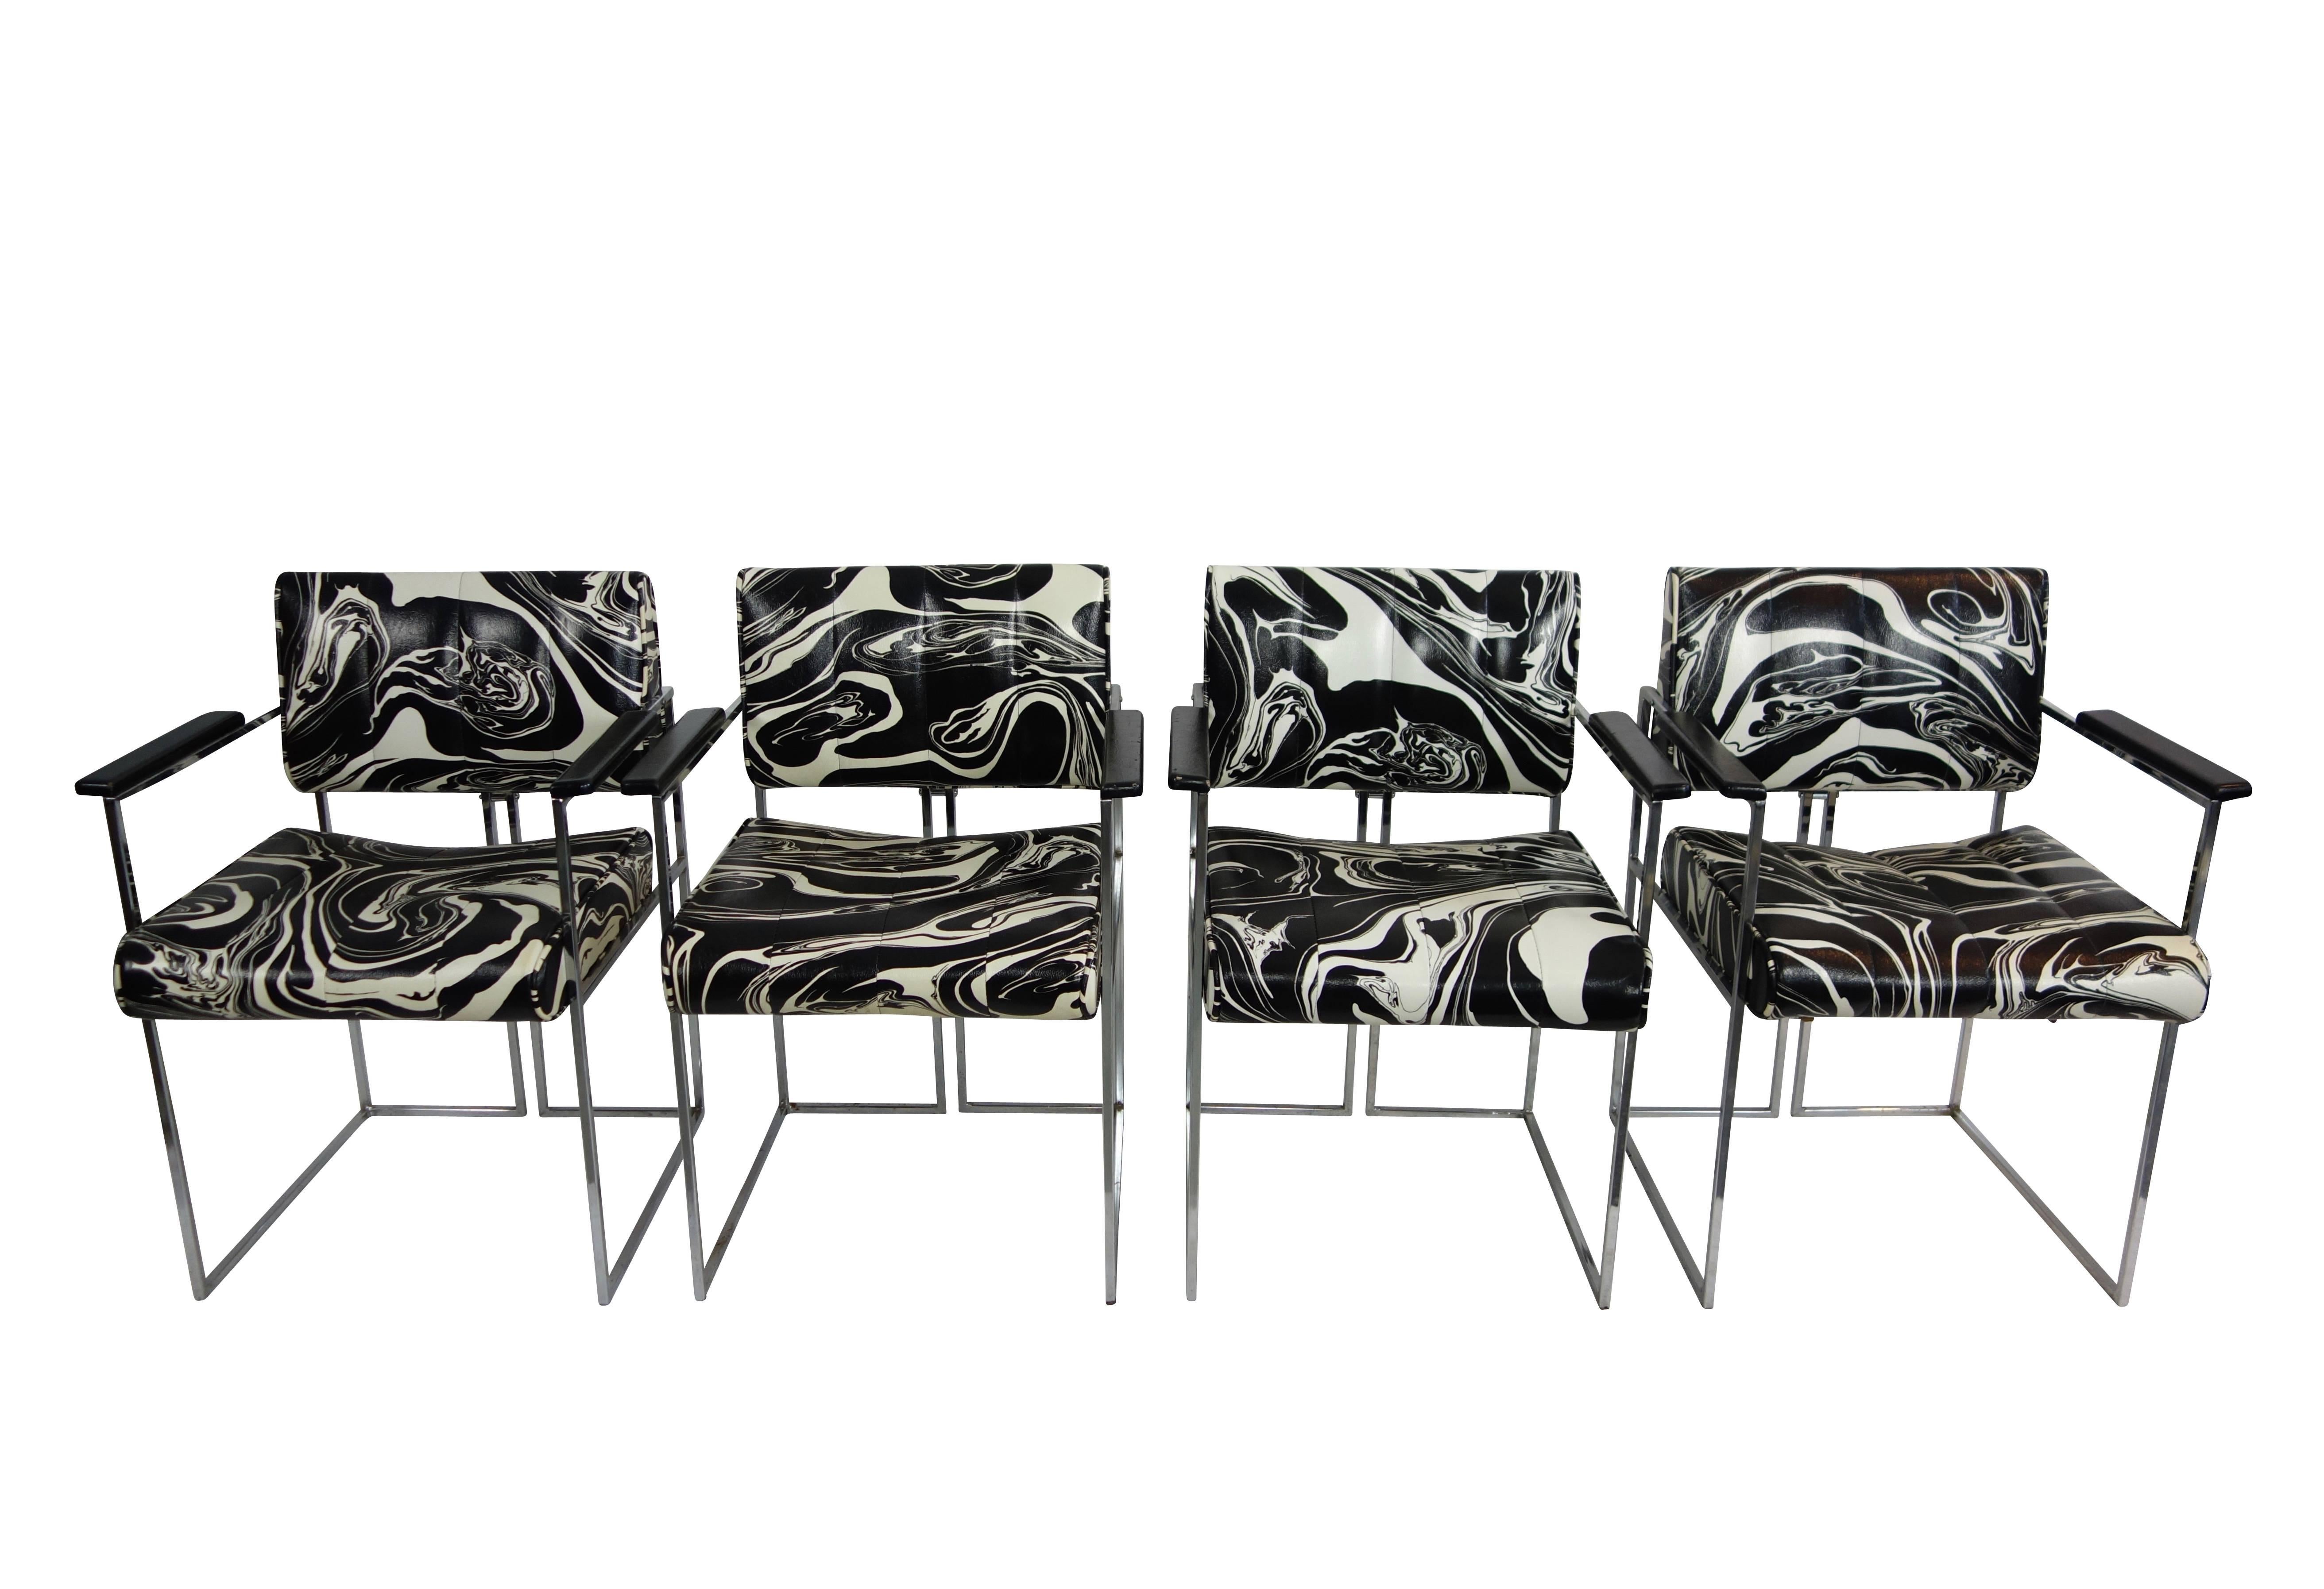 This is a set of four vintage black and white marbled vinyl chairs with sleek chrome frames by Samton. The original labels are intact on the underside of the chairs. Made in Canada.